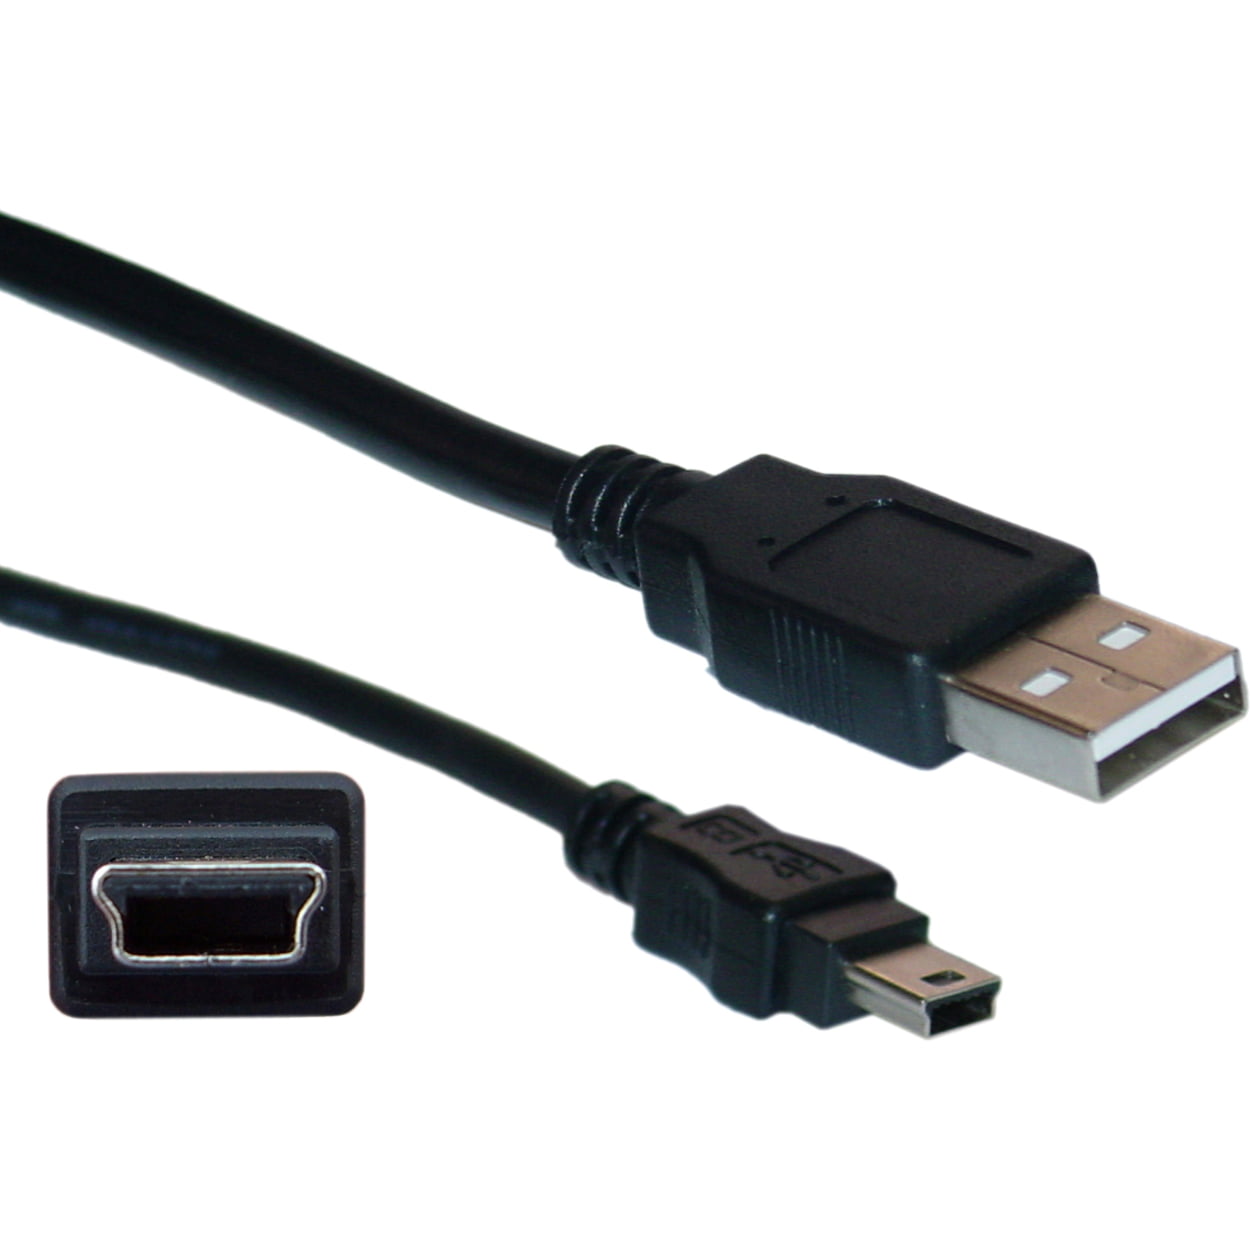 USB2-A506G 6ft USB 2.0 A-Type Male to Mini-B 5-Pin Male Black Gold-Plated Cable 